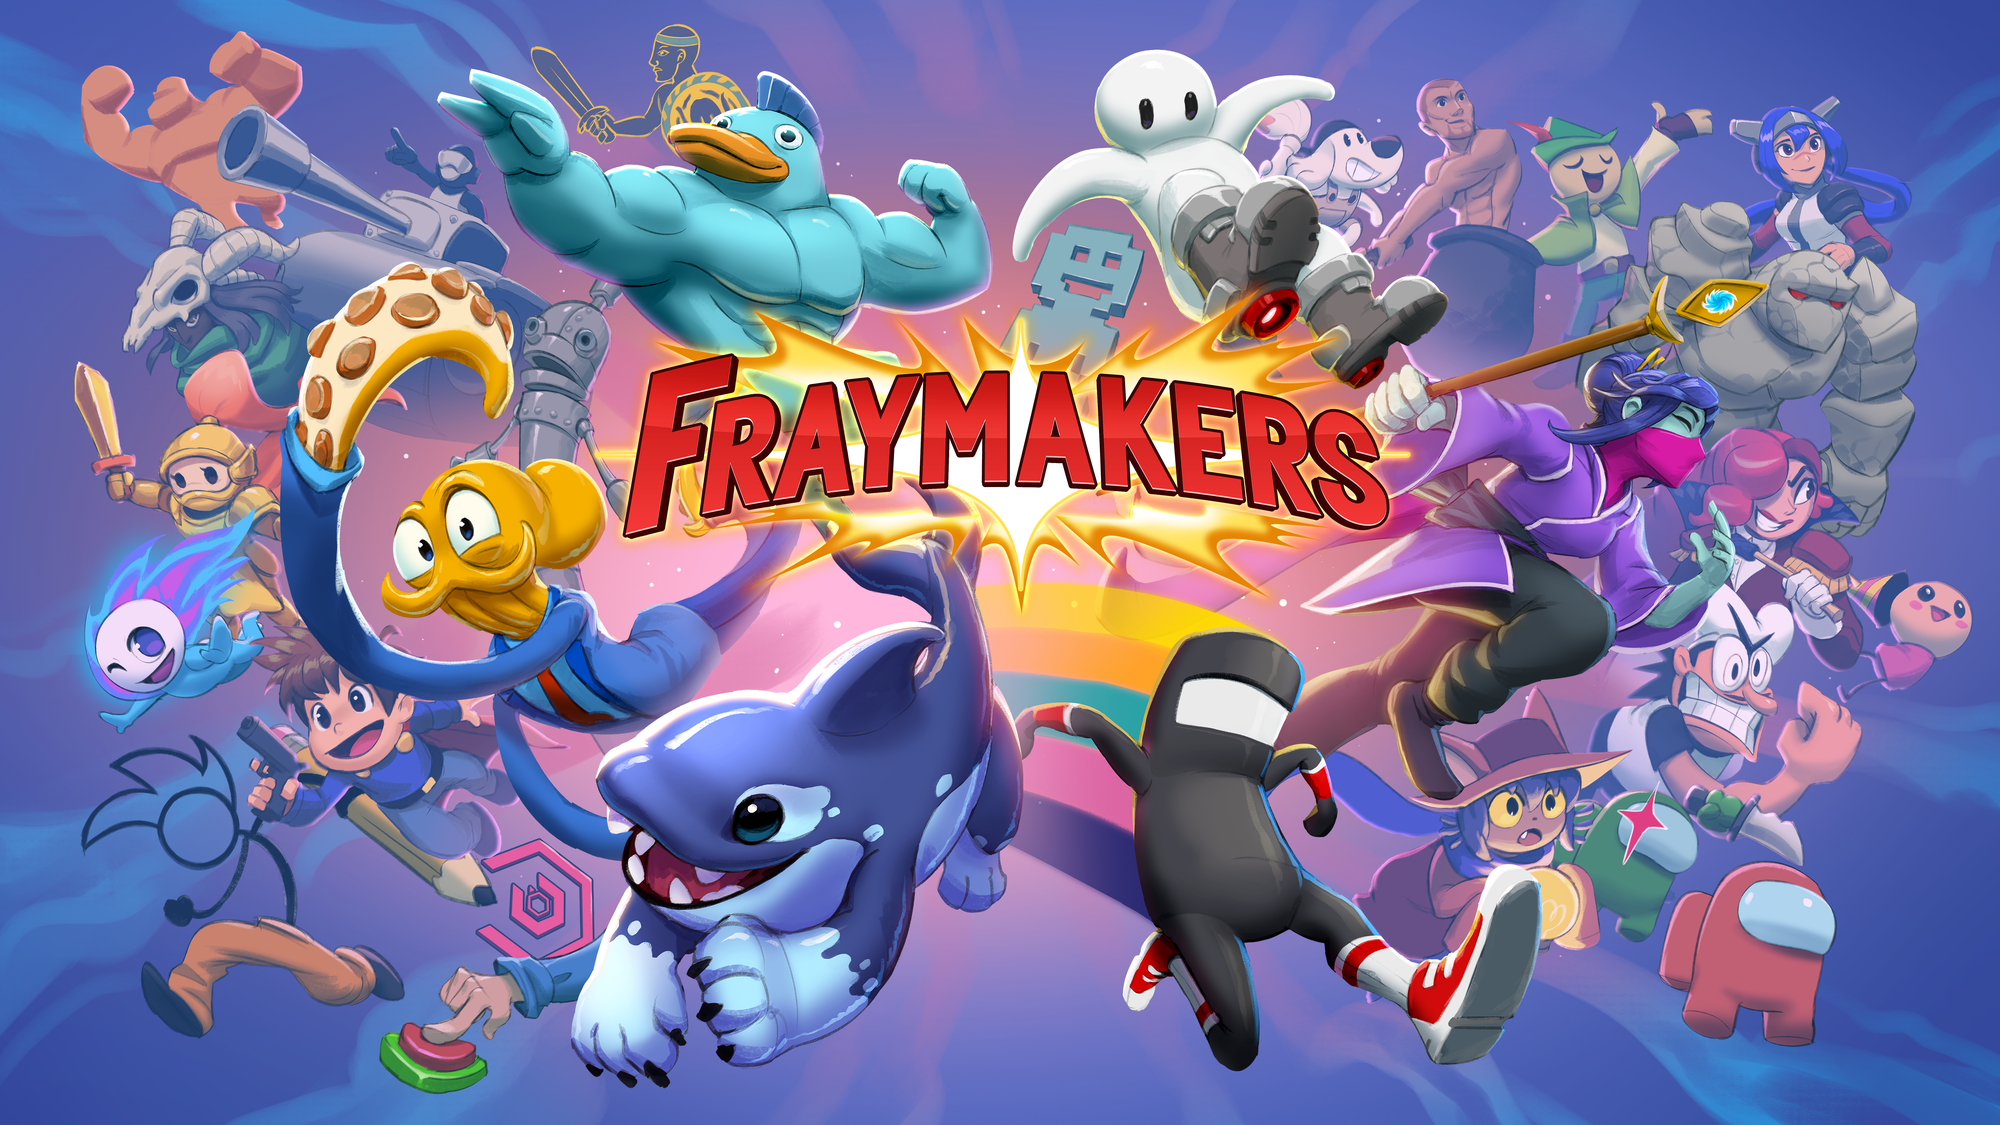 Fraymakers: The Ultimate Platform Fighting Game